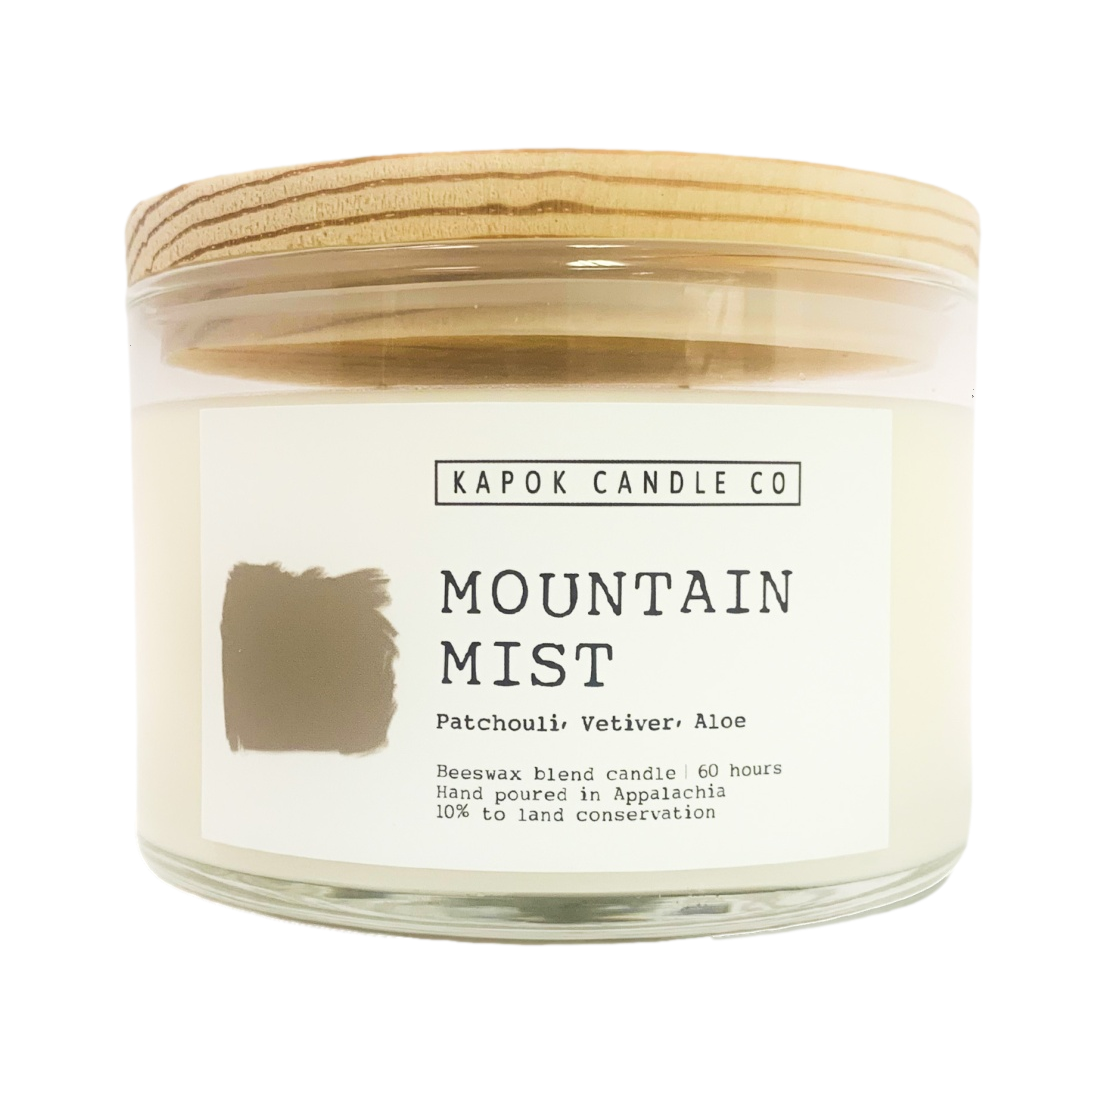 Mountain Mist Beeswax Blend Candle, 100% Cotton Wicks, Wooden Lid